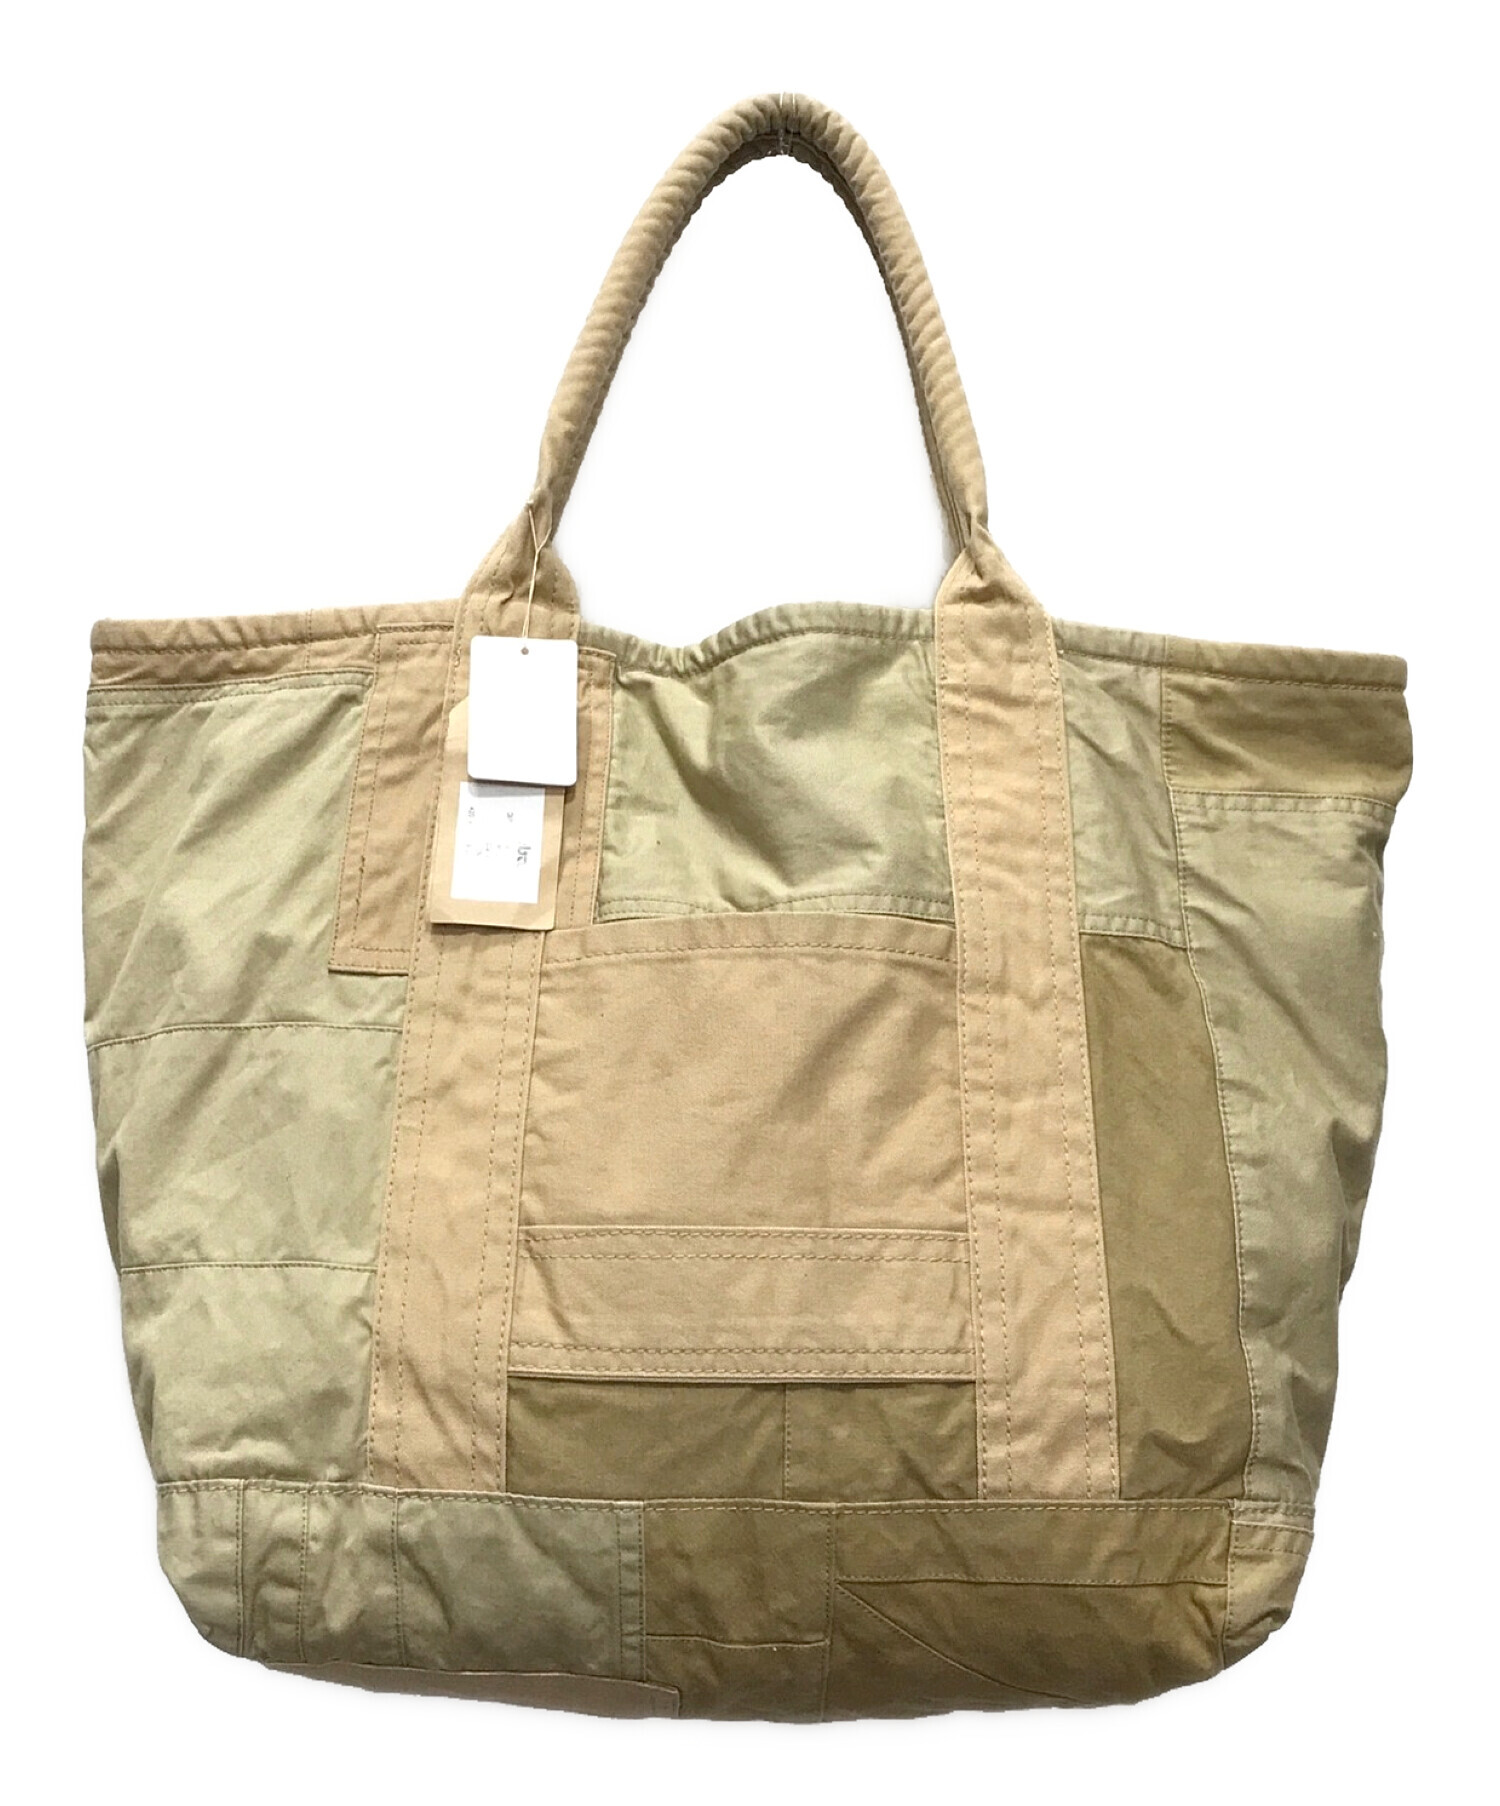 hobo (ホーボー) CARRY-ALL TOTE L UPCYCLED FRENCH ARMY CLOTH ベージュ サイズ:下記参照 未使用品